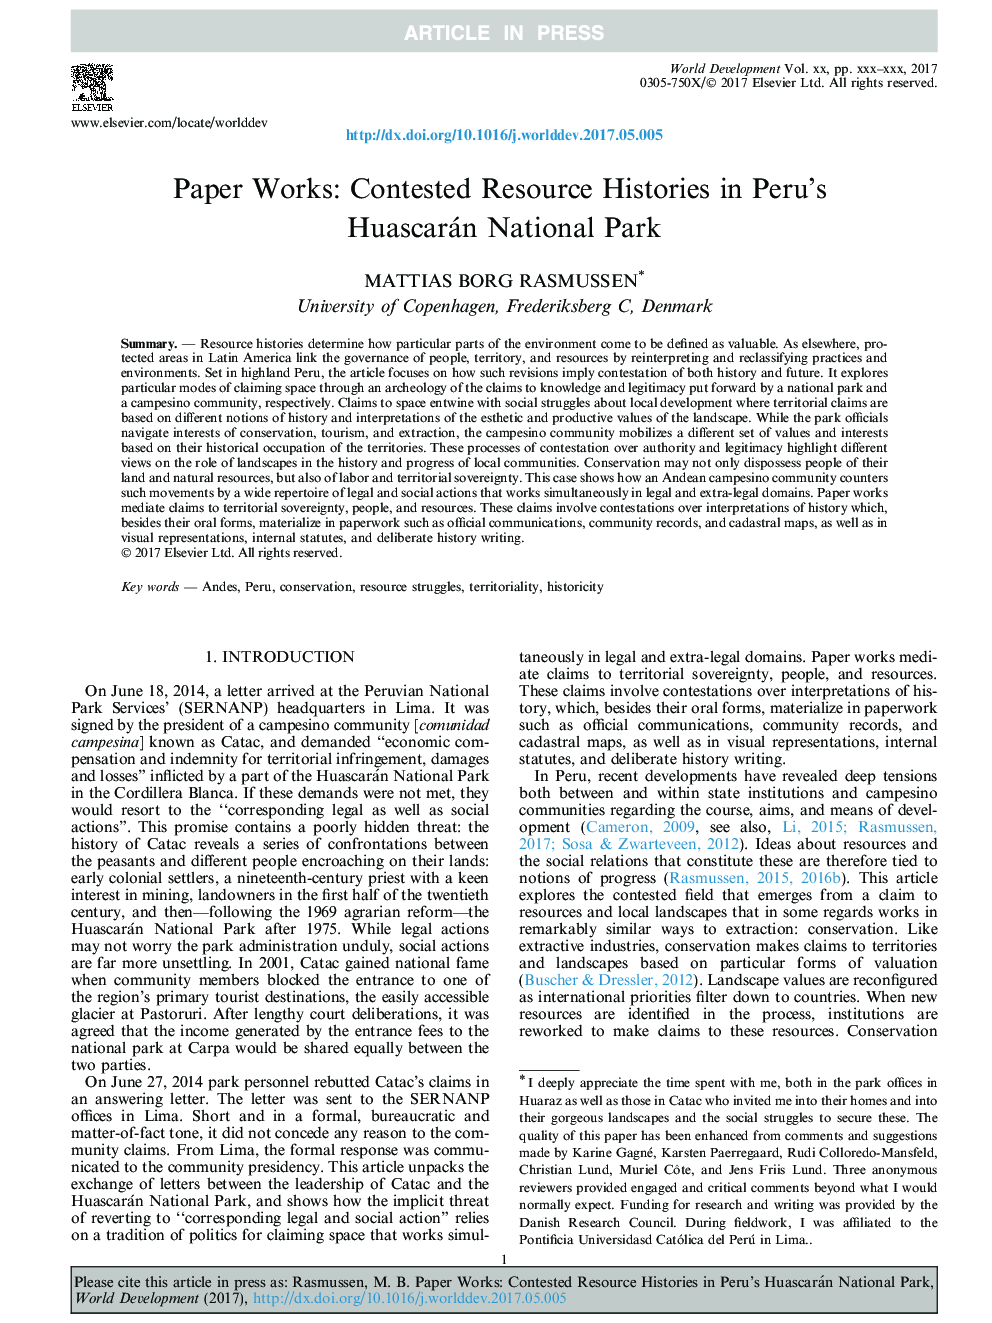 Paper Works: Contested Resource Histories in Peru's Huascarán National Park